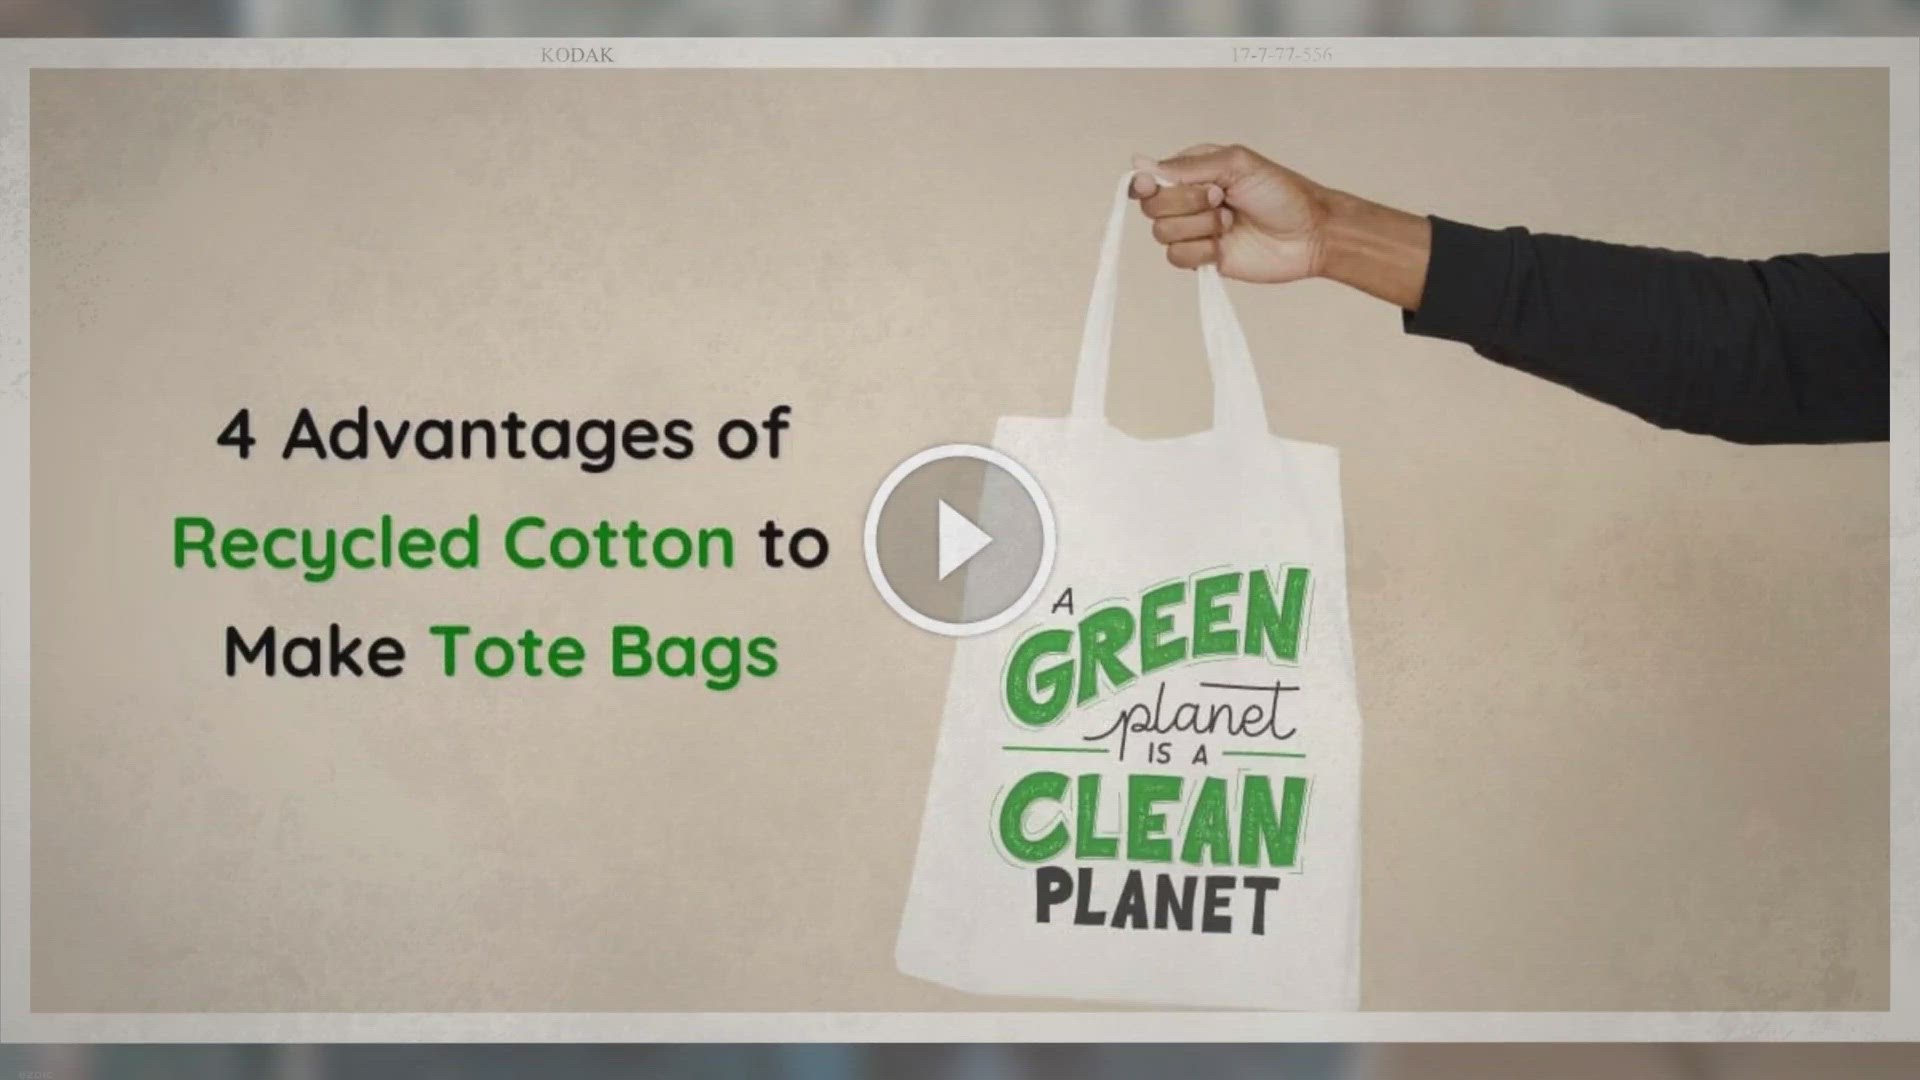 What Are The Advantages Of Printed Bags For A Company?